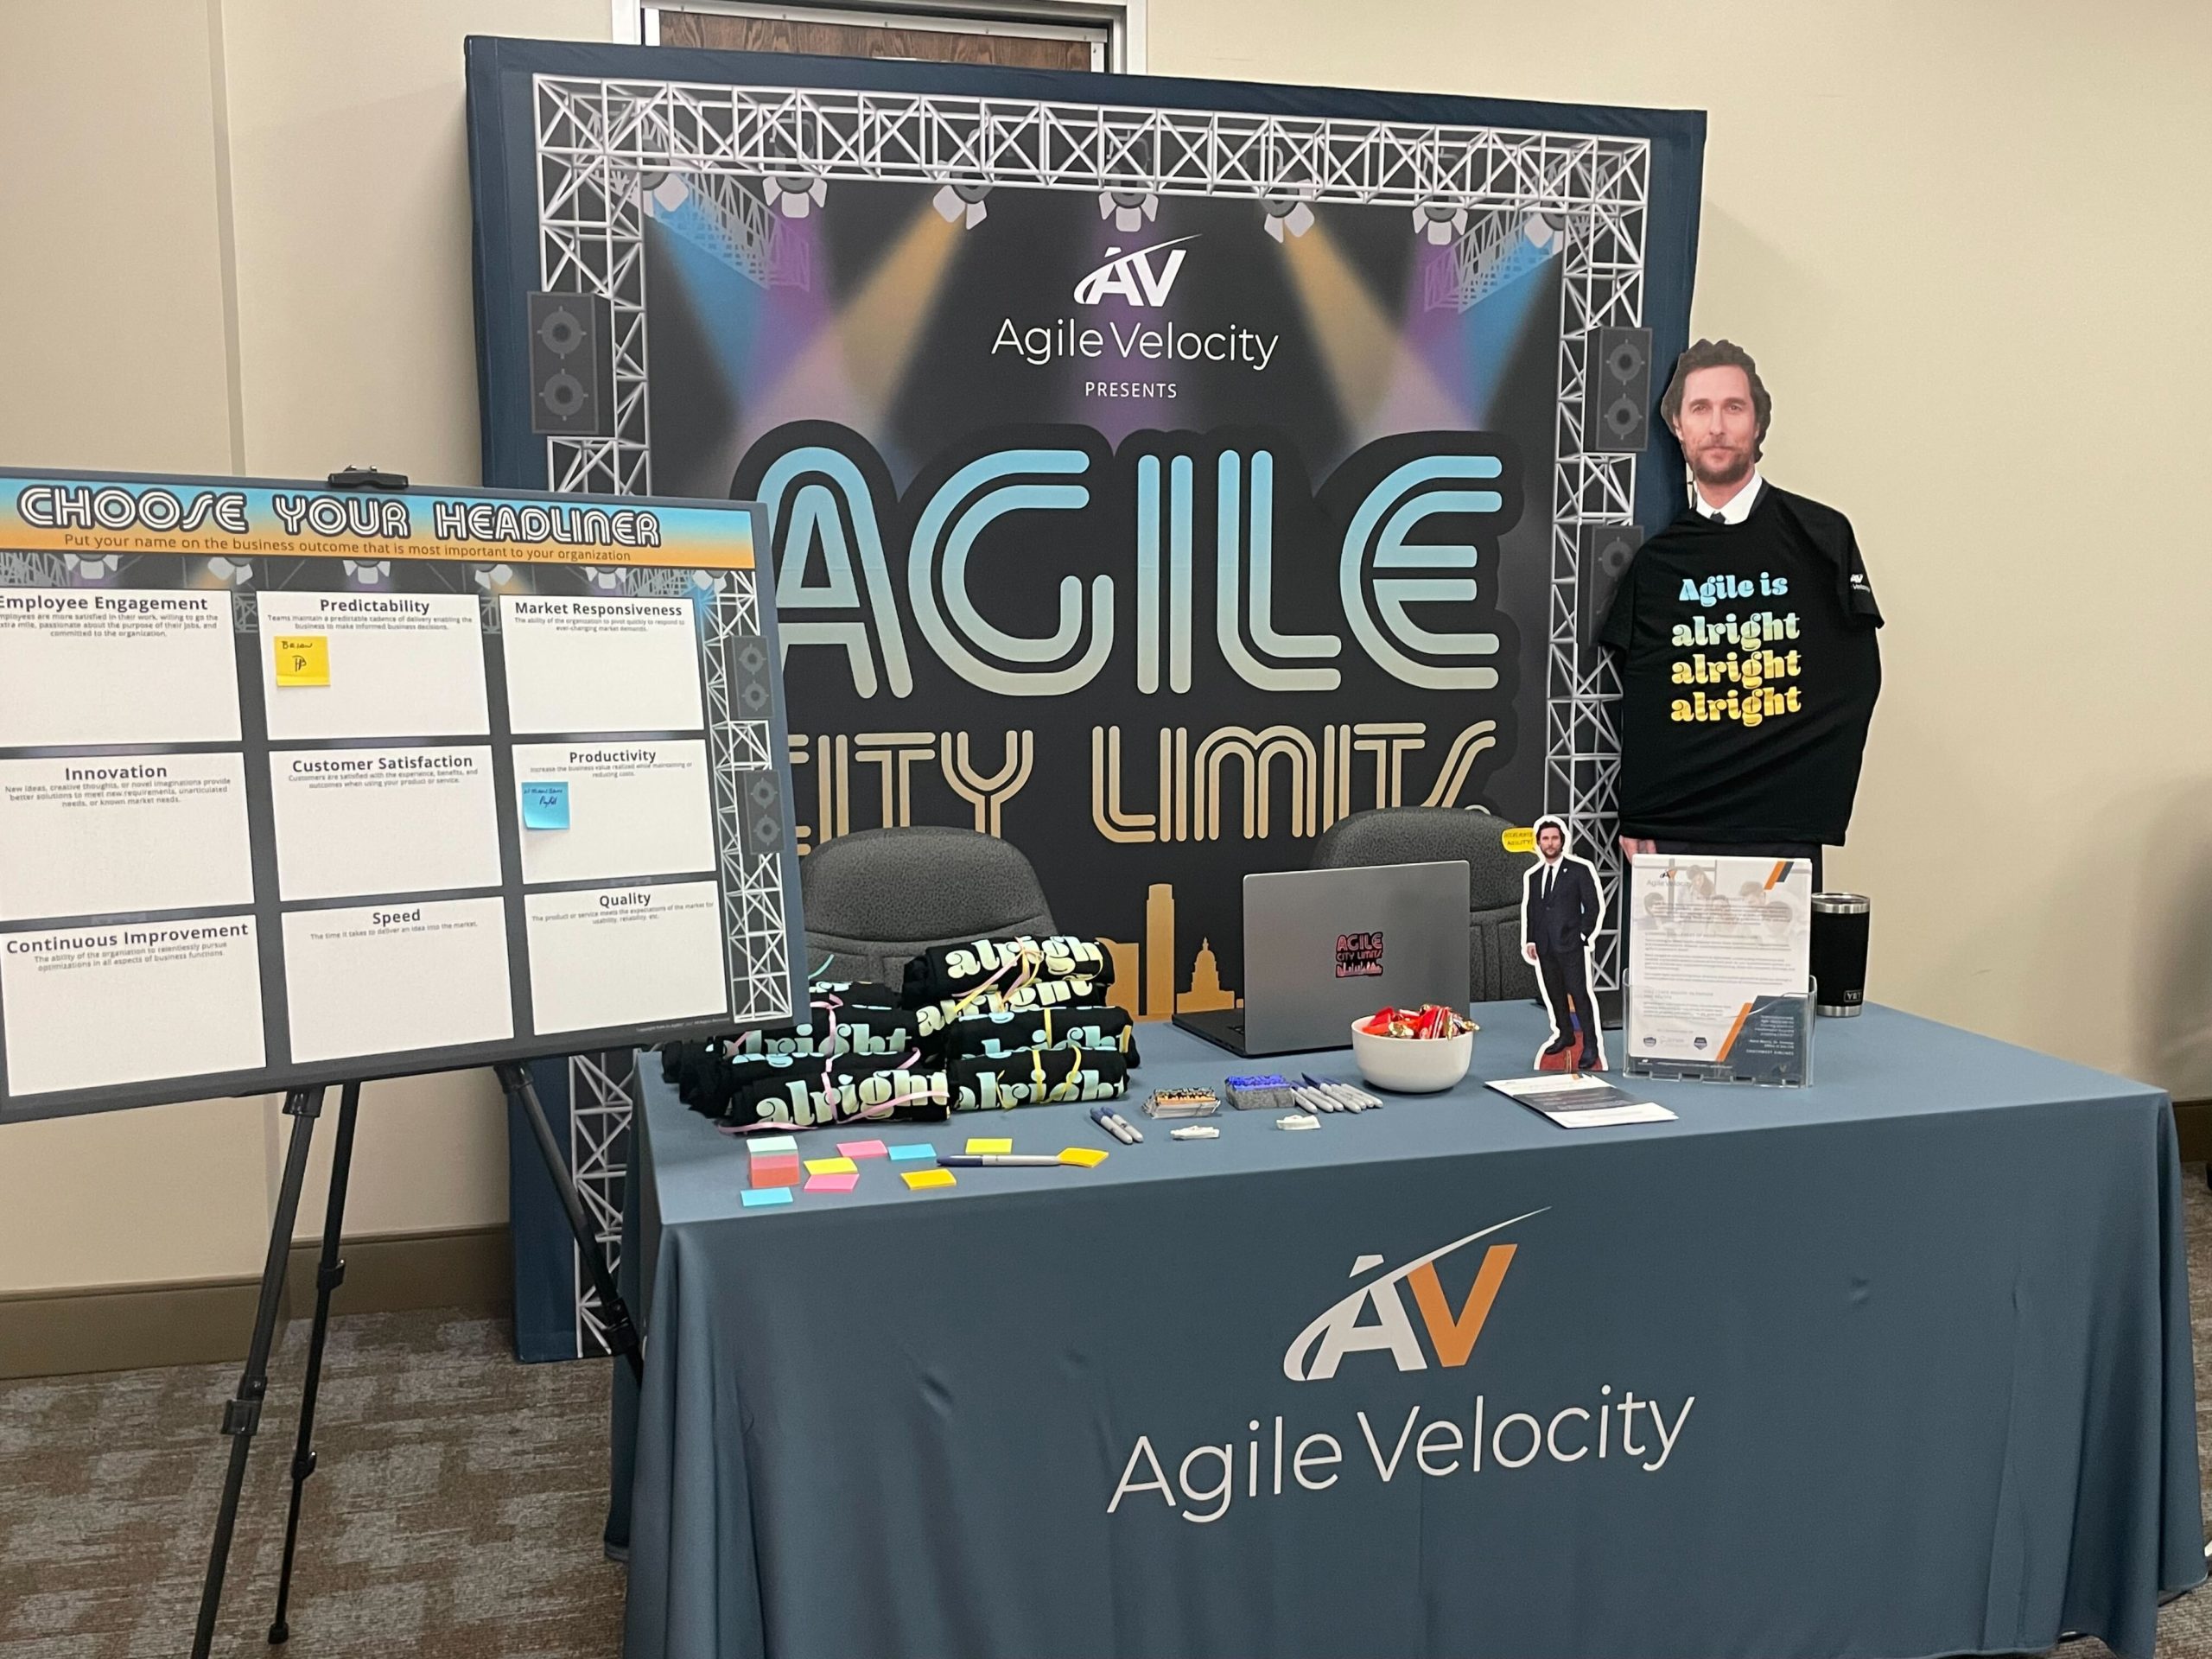 An image of our Agile City Limits booth at Keep Austin Agile